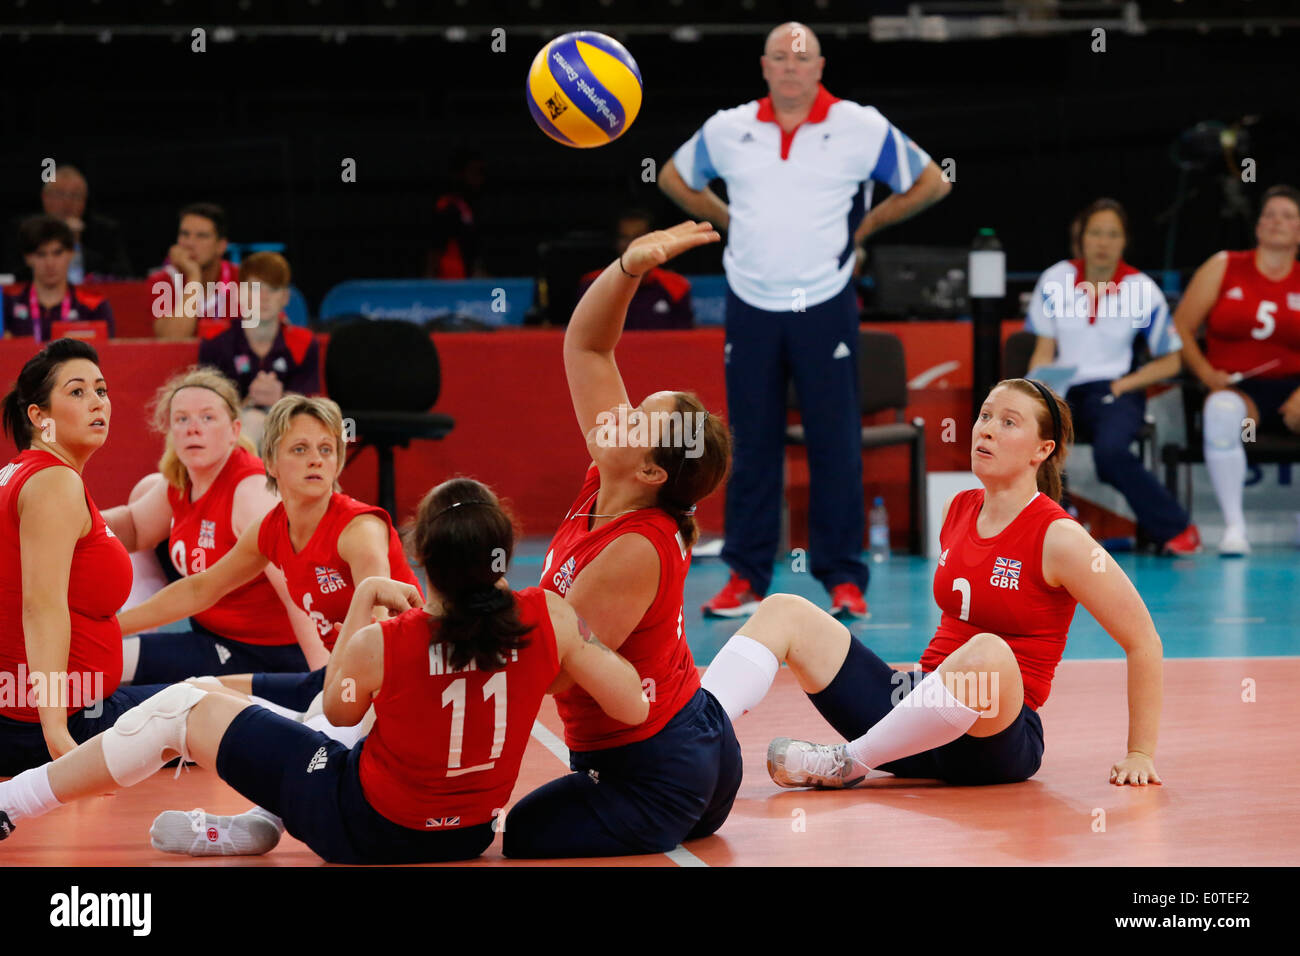 Martine Wright of Great Britain (c) in action during the London 2012 Paralympic Games first pool A match Women's sitting volleyball Great Britain vs Ukraine in London, Britain, 31 August 2012. Wright lost both of her legs in the Aldgate underground explosion in the July 7 London bombings in 2005. Ukraine won 3-0 Stock Photo